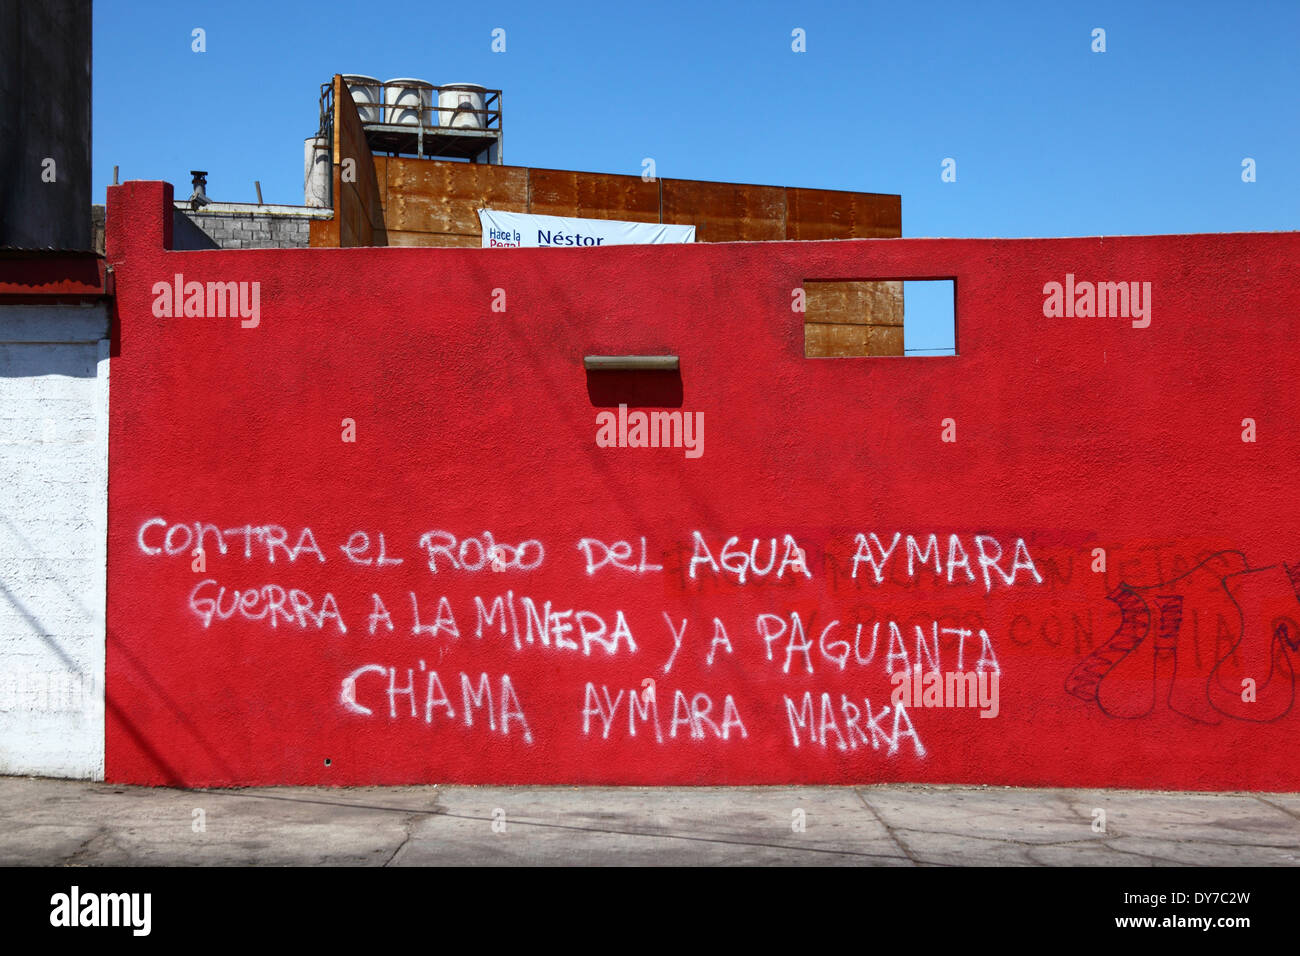 Graffiti protesting against use of water resources by Paguanta and other mining projects, Iquique, Region I , Chile Stock Photo